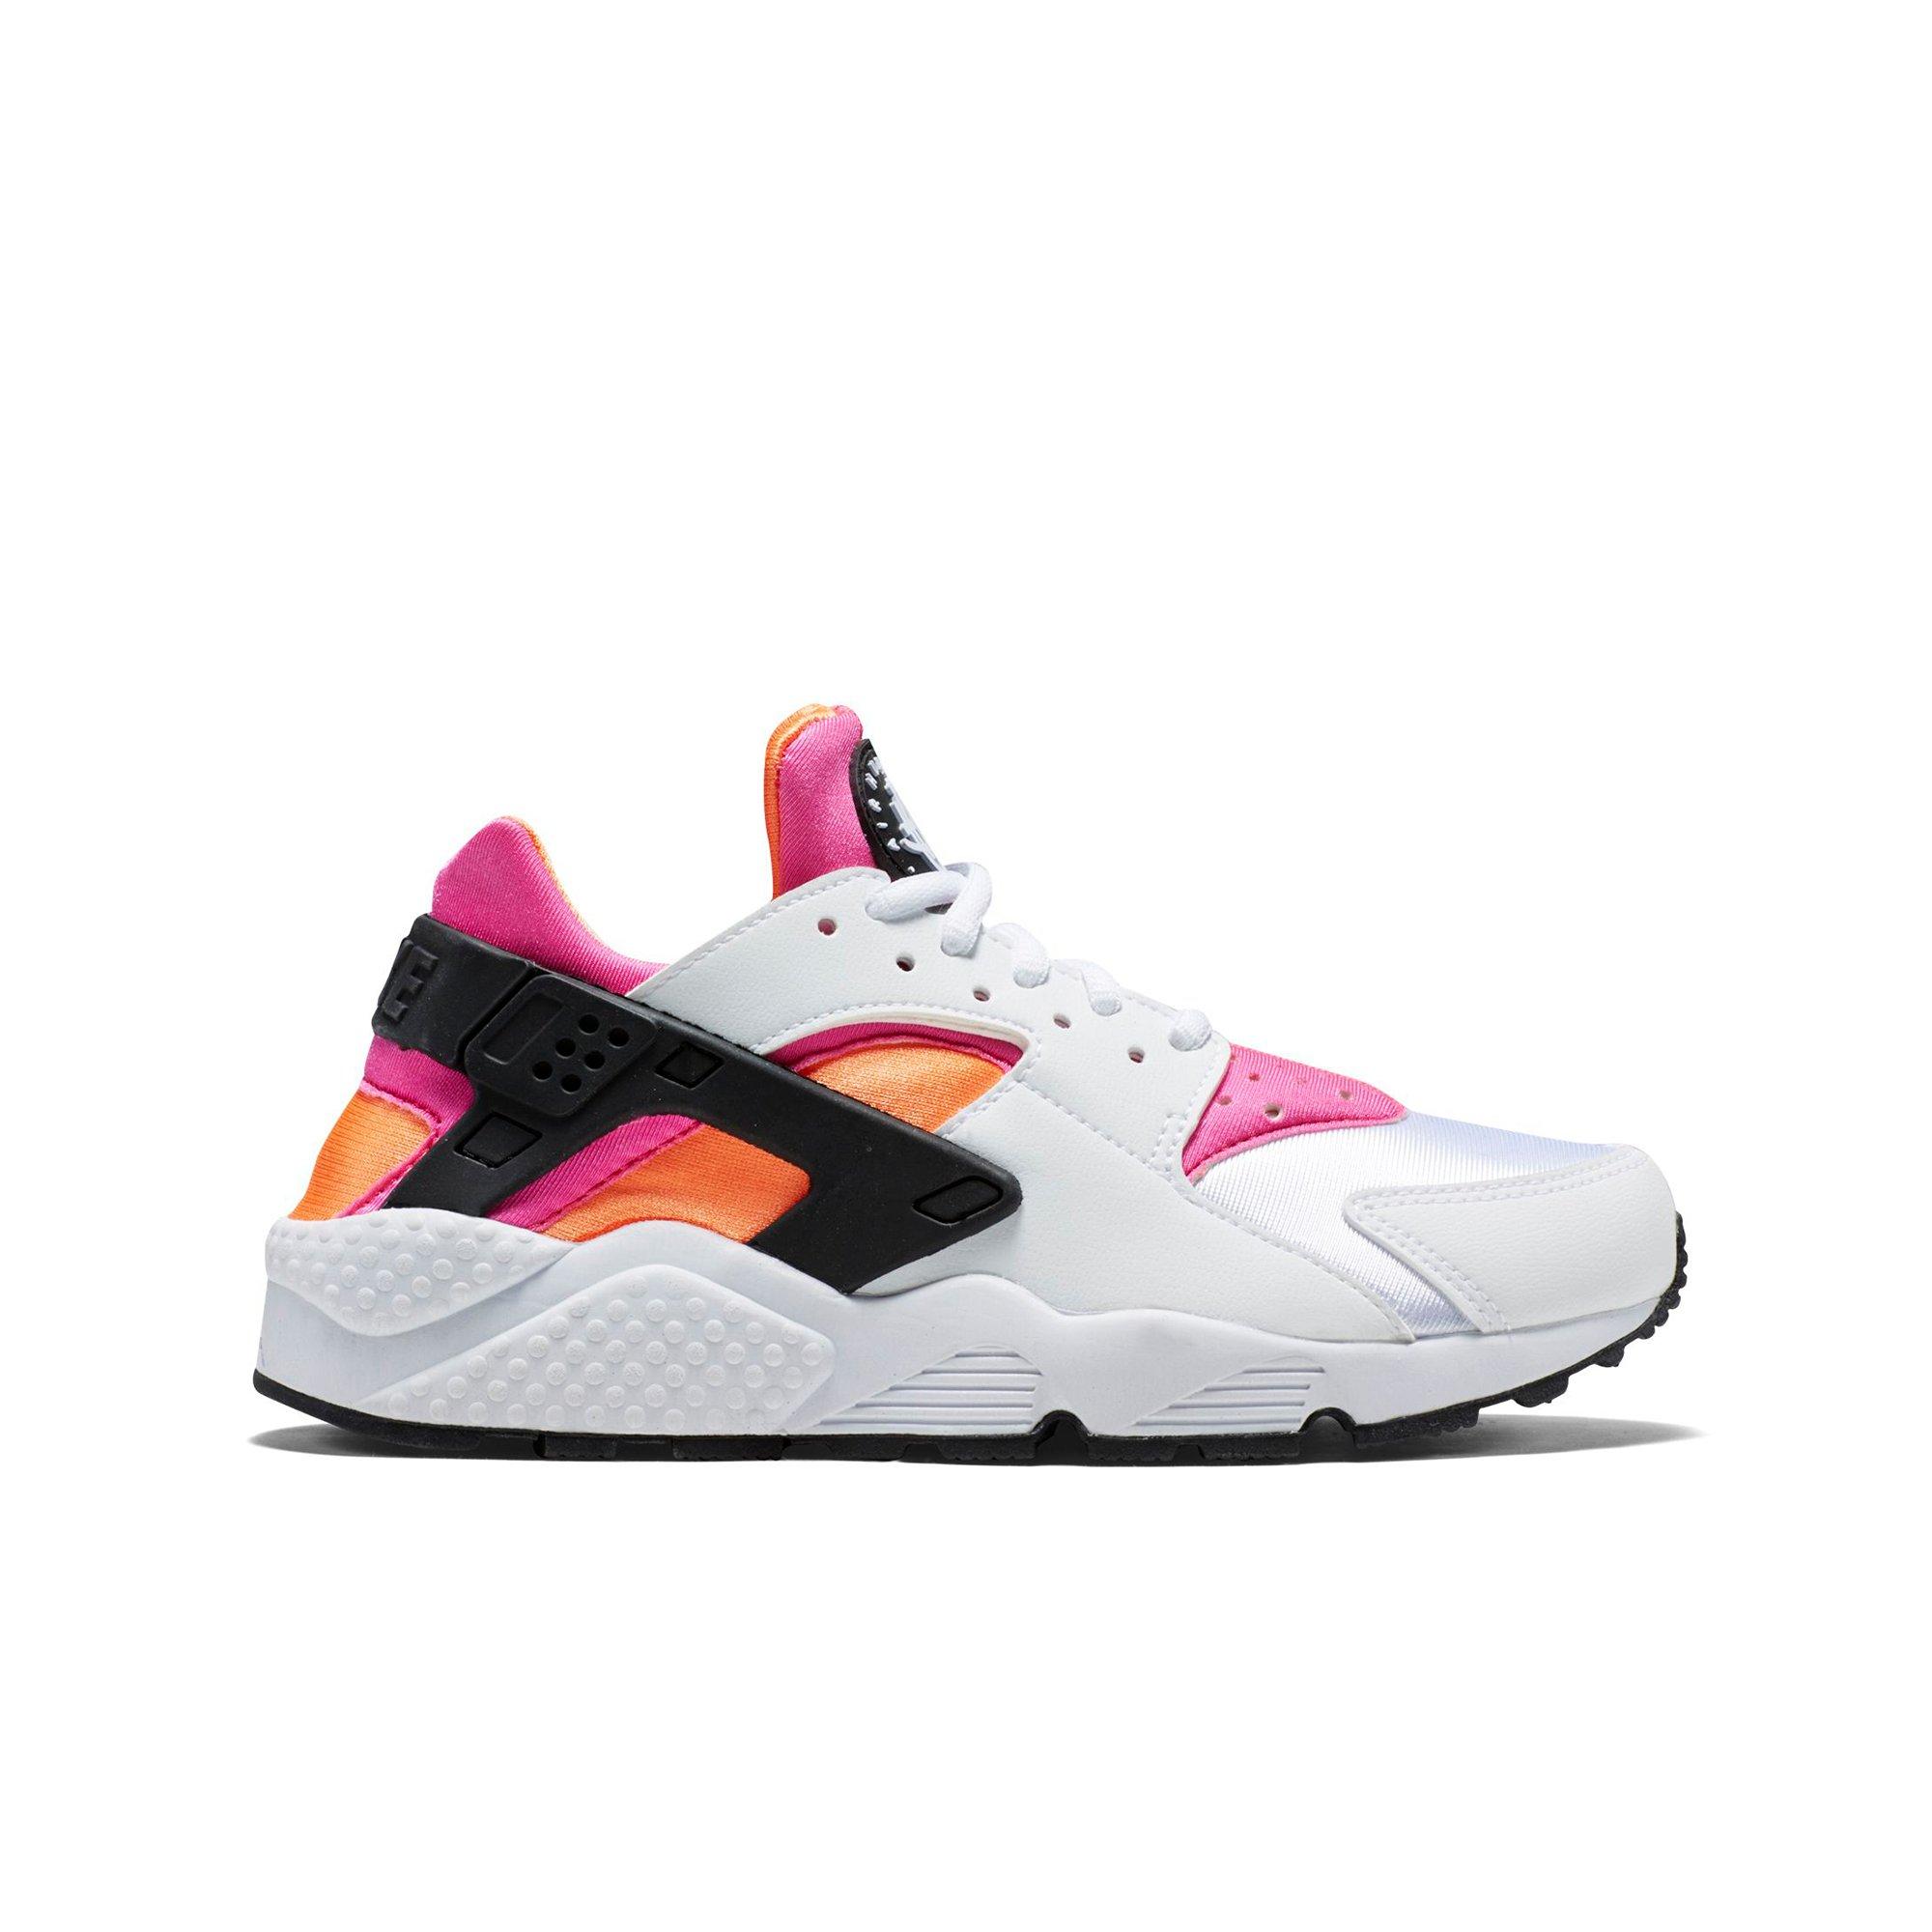 pink and orange tennis shoes